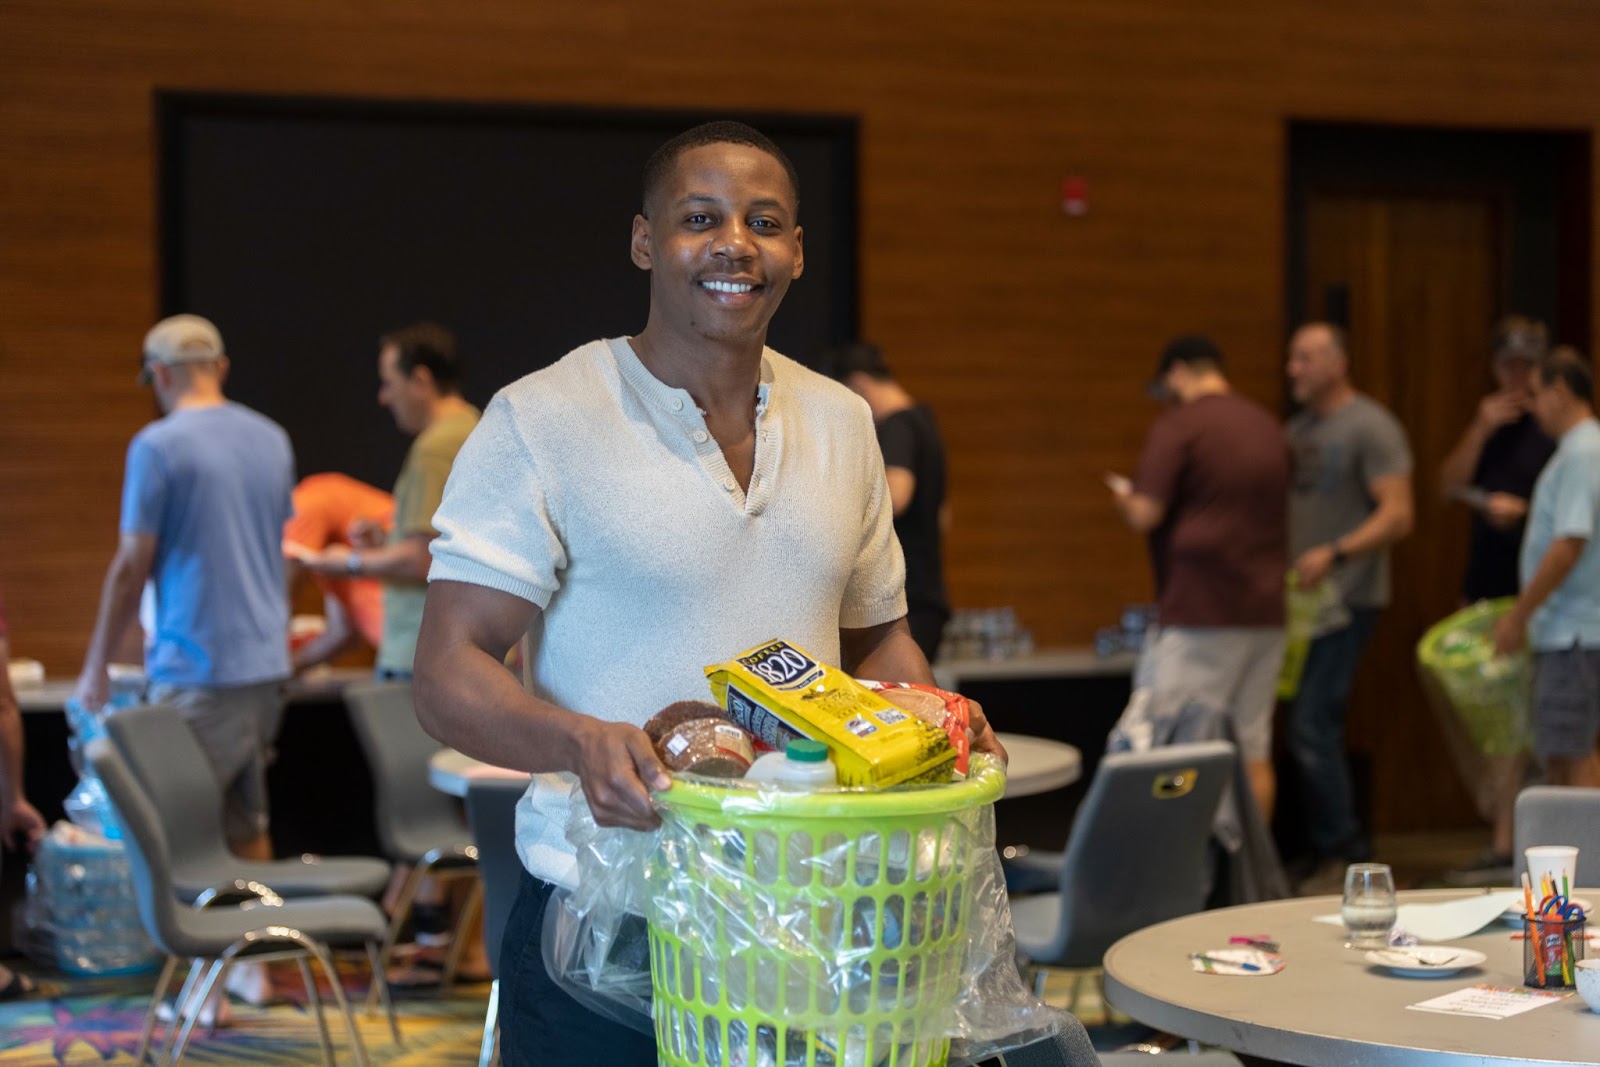 Charity Packing Event Man Smiling